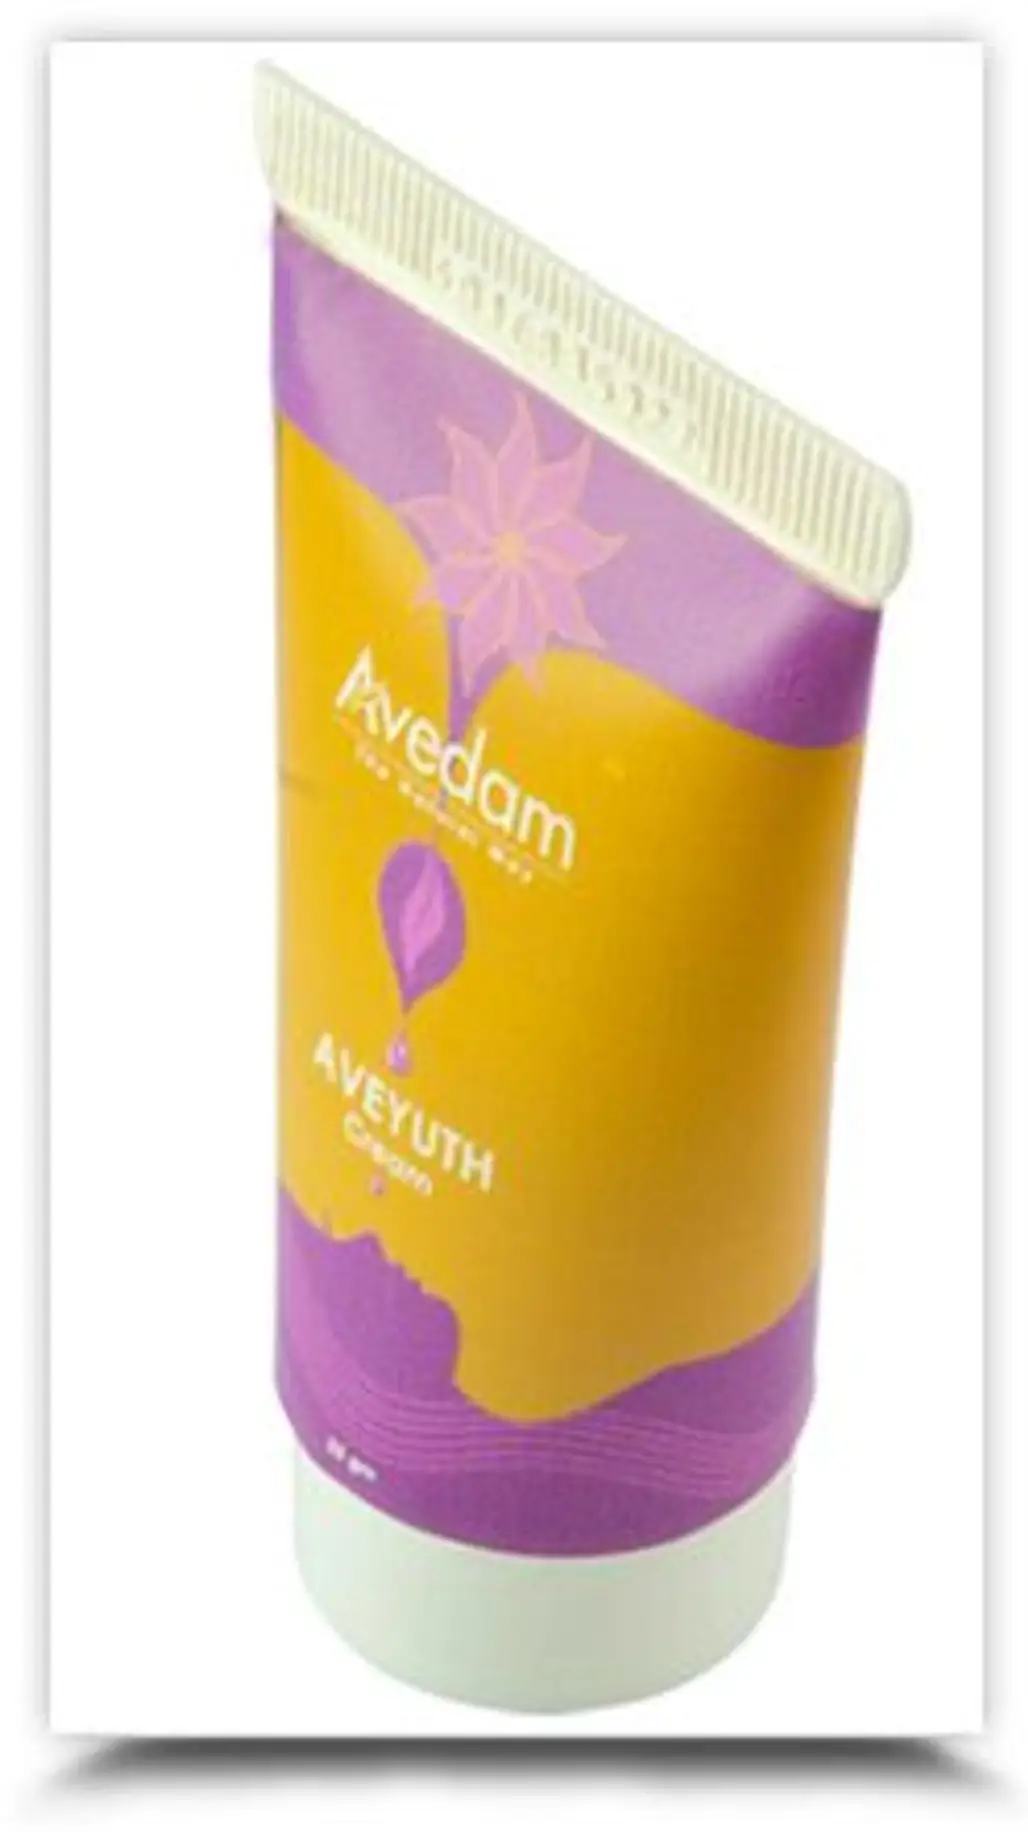 Avedam Skin Care Products